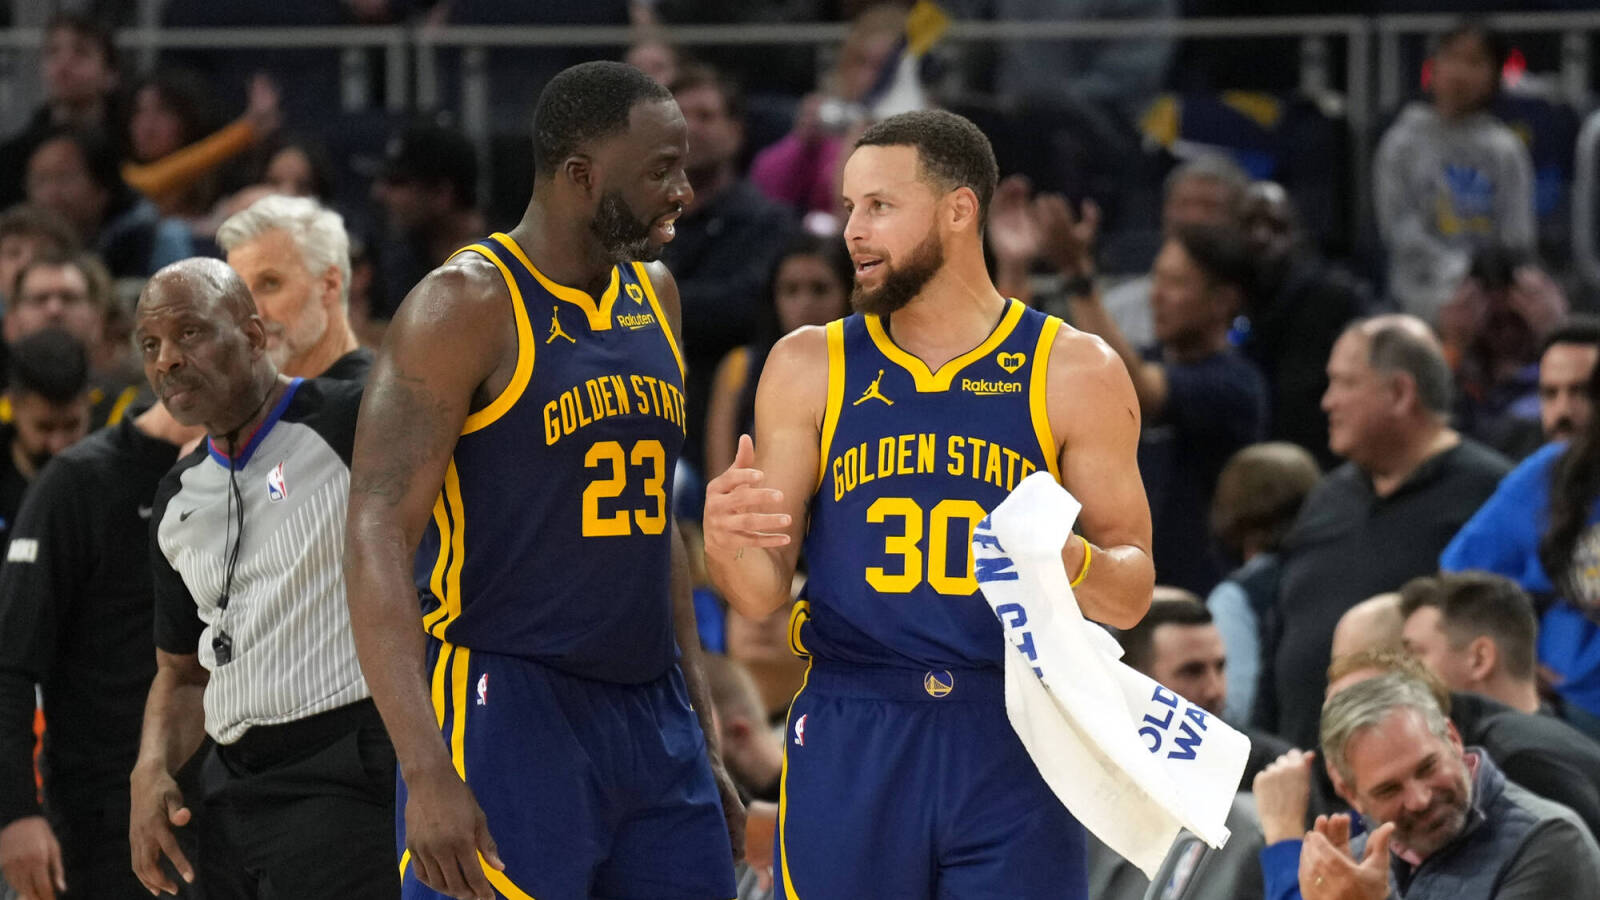 Watch: Ejected Draymond Green greets Stephen Curry after Warriors’ win over Magic